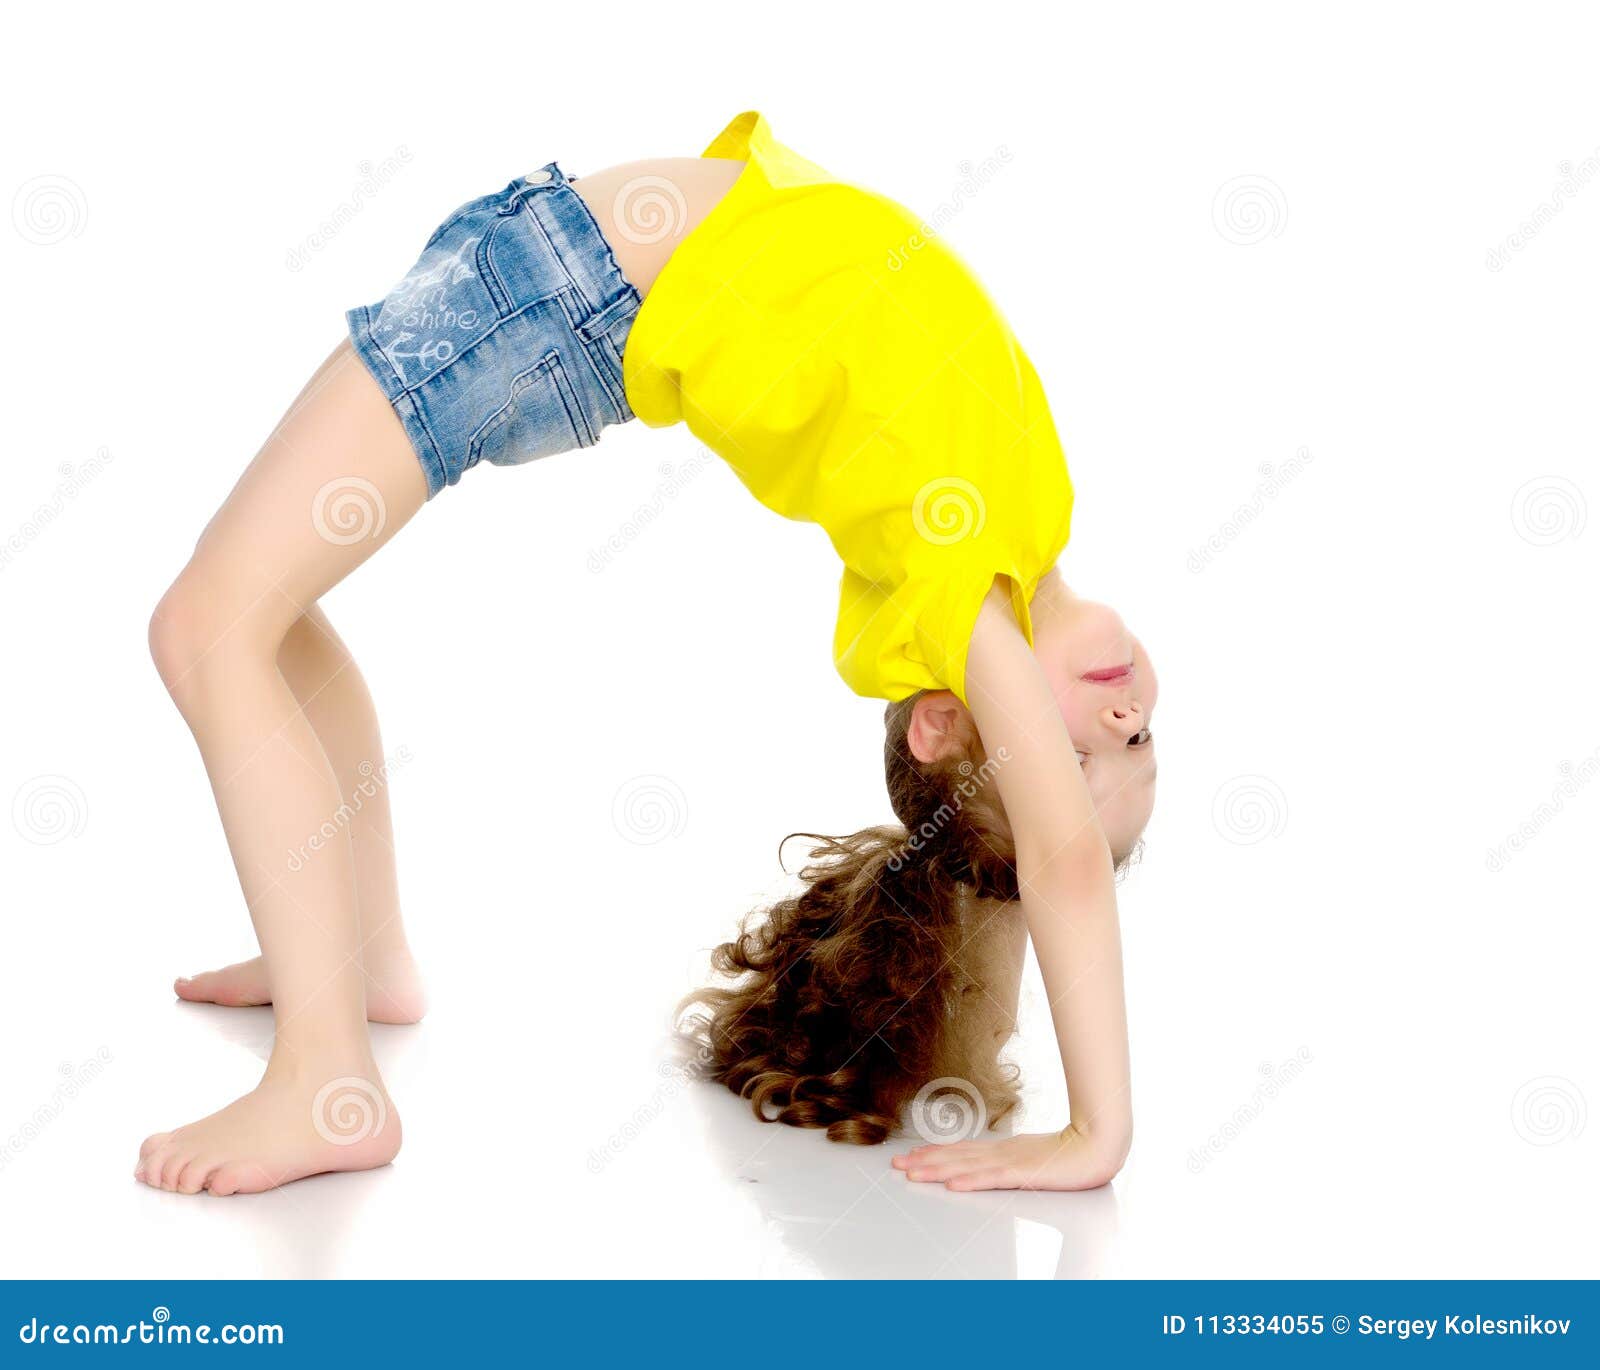 The Little Gymnast Performs a Bridge. Stock Image - Image of background ...